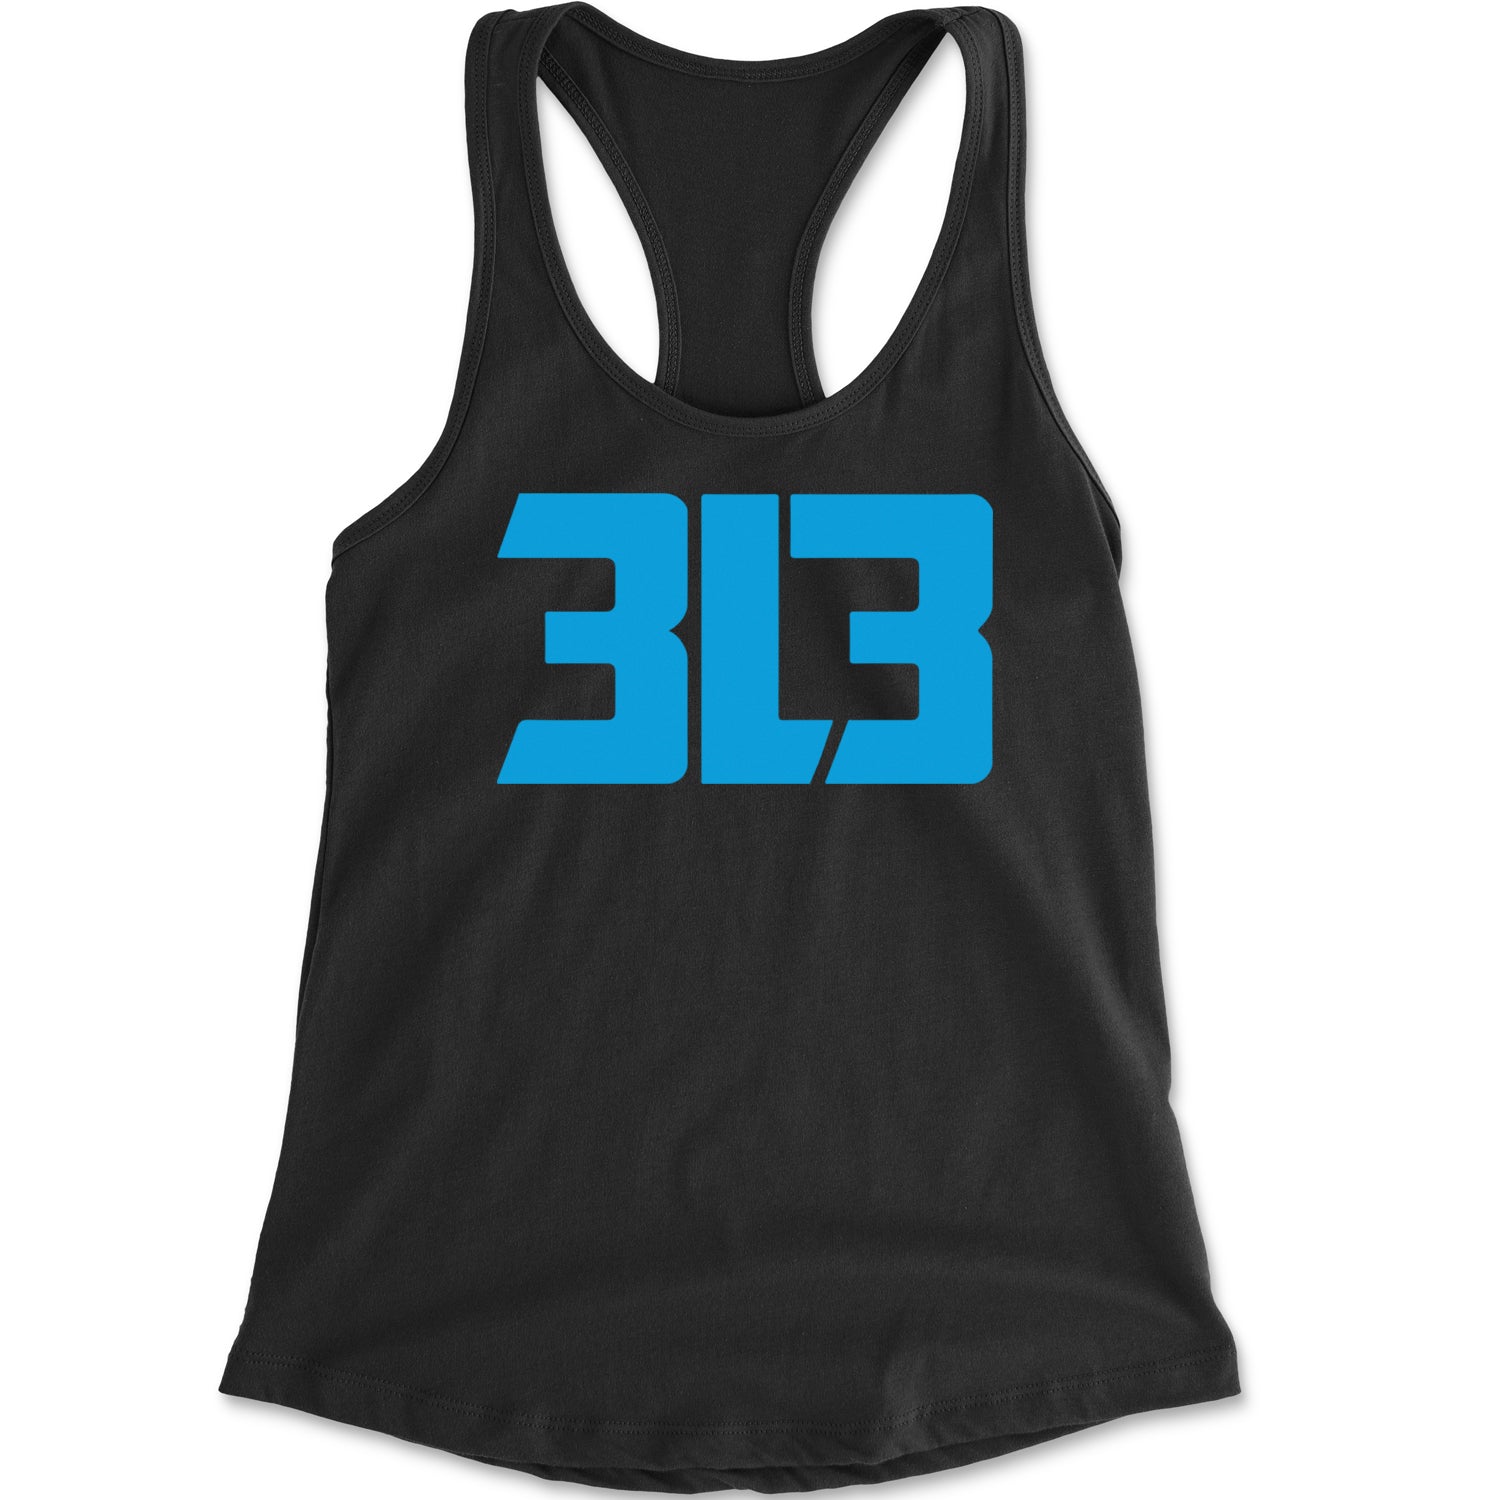 3L3 From The 313 Detroit Football Racerback Tank Top for Women